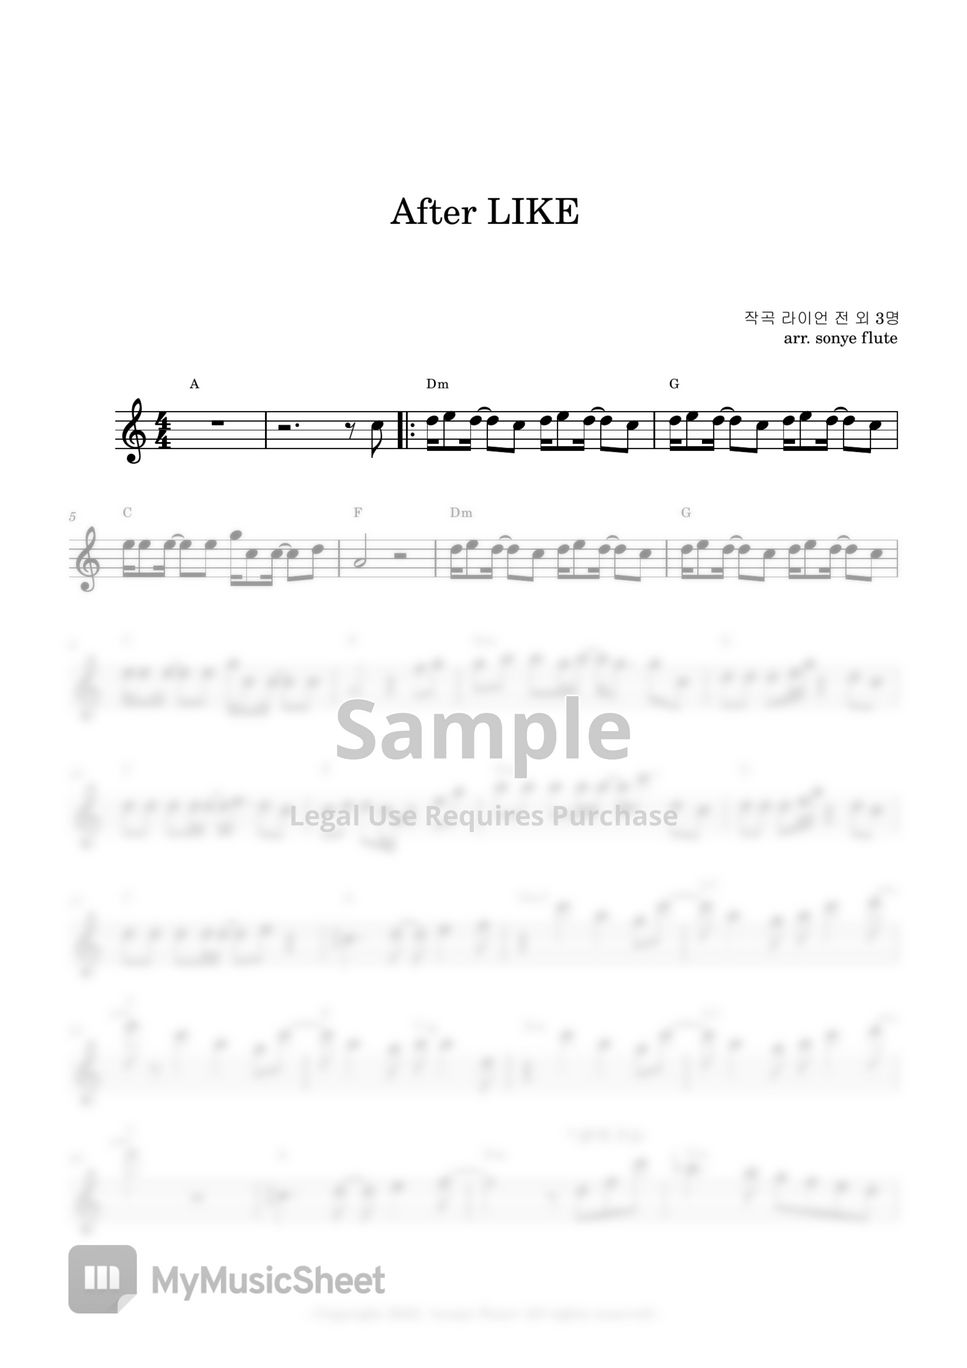 IVE - After LIKE (Flute Sheet Music) by sonye flute